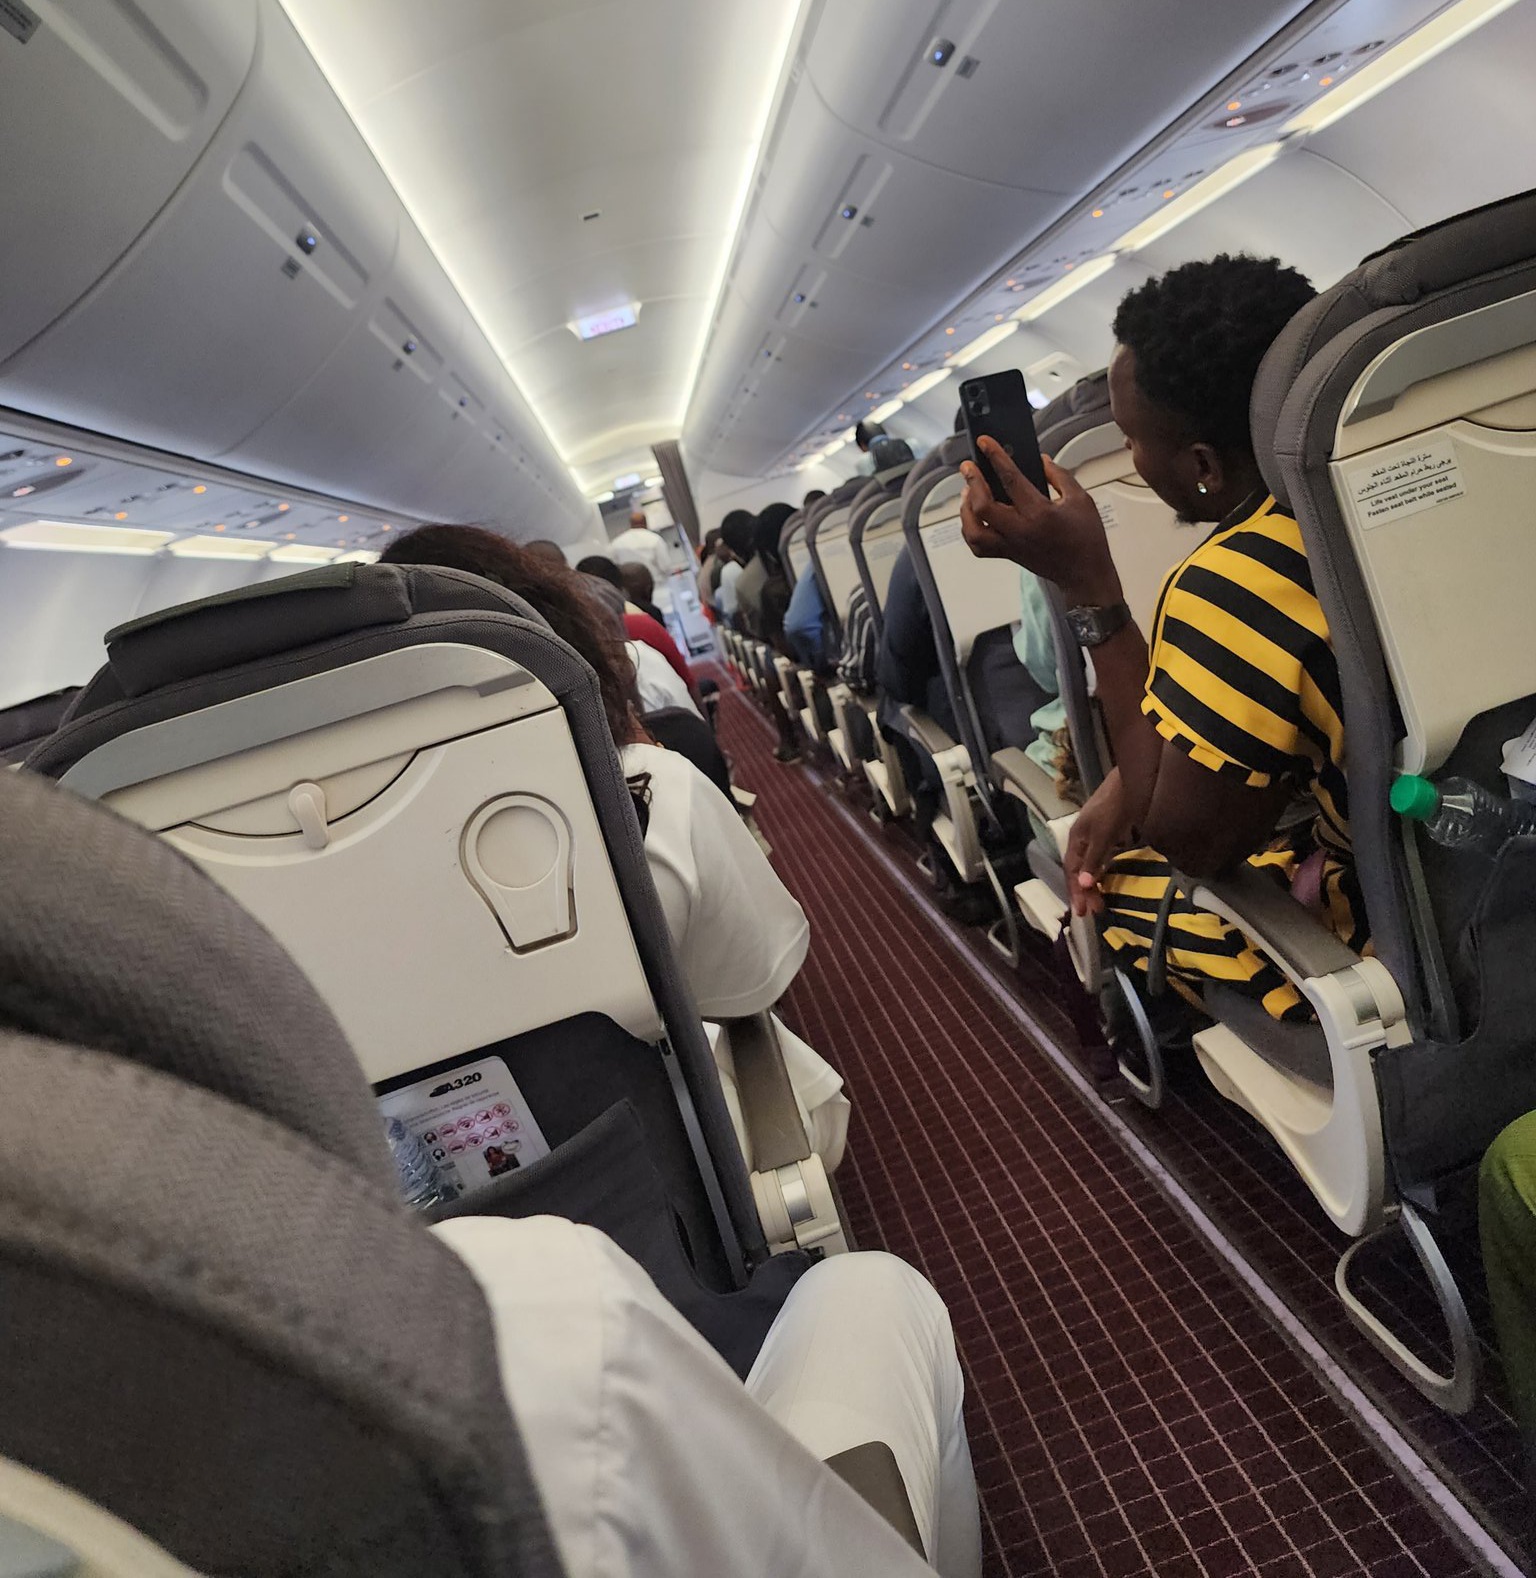 Passengers in the United Nigeria Airlines flight, NUA 0504, which allegedly mistakenly flew passengers to Asaba instead of Abuja